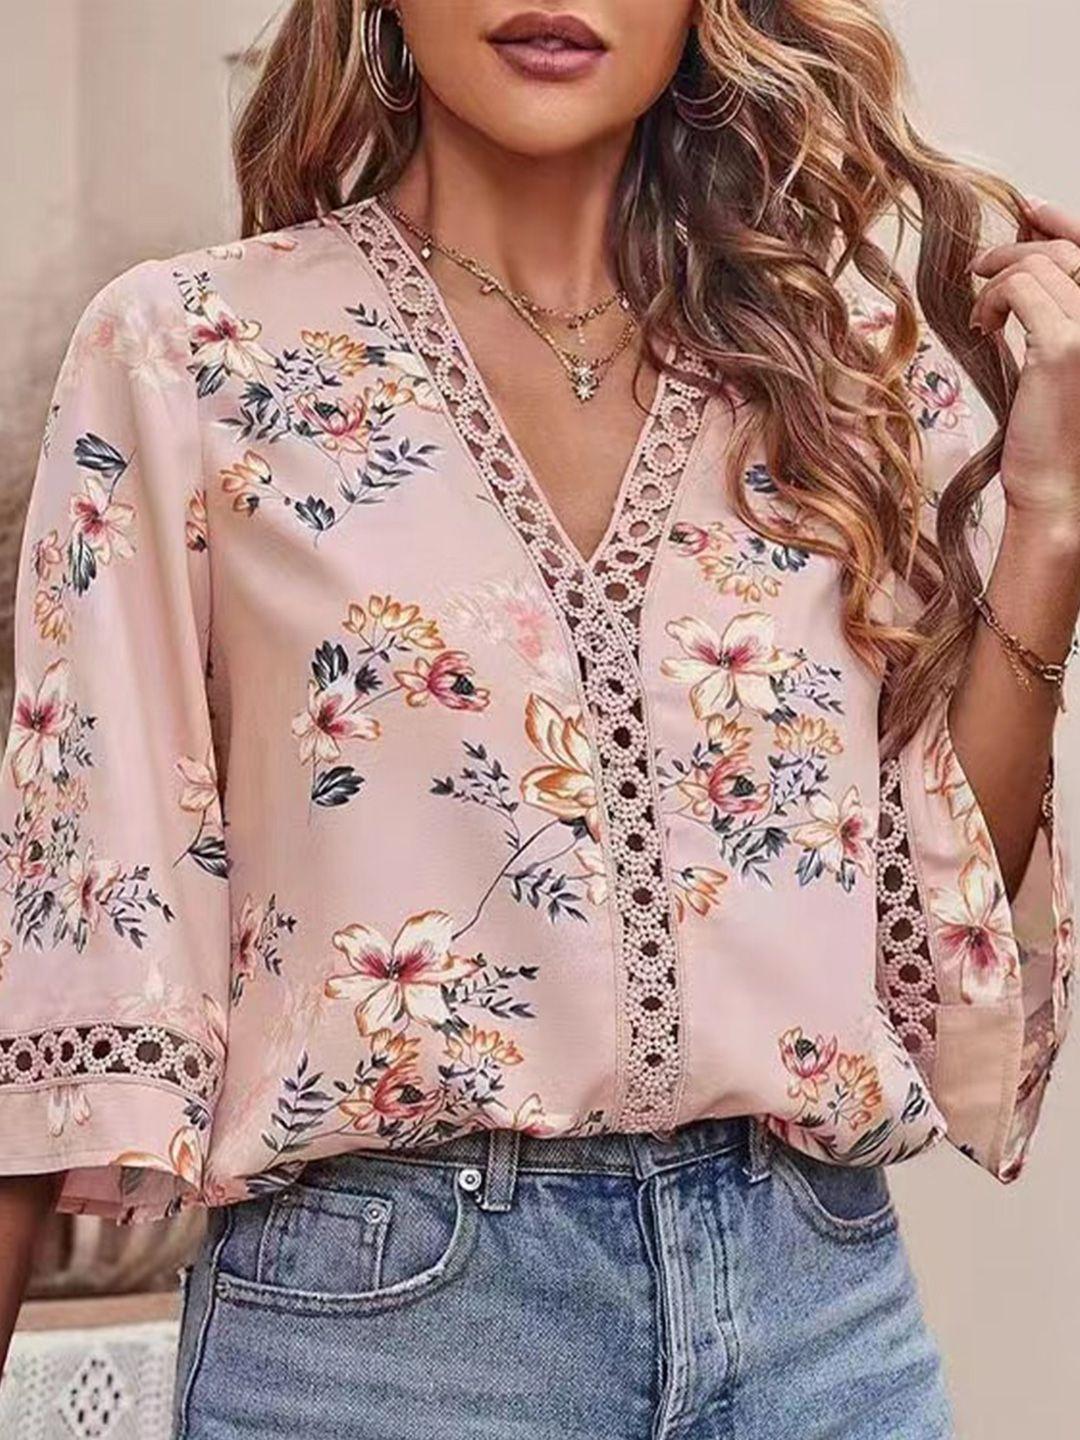 stylecast-beige-&-pink-floral-print-flared-sleeve-chiffon-top